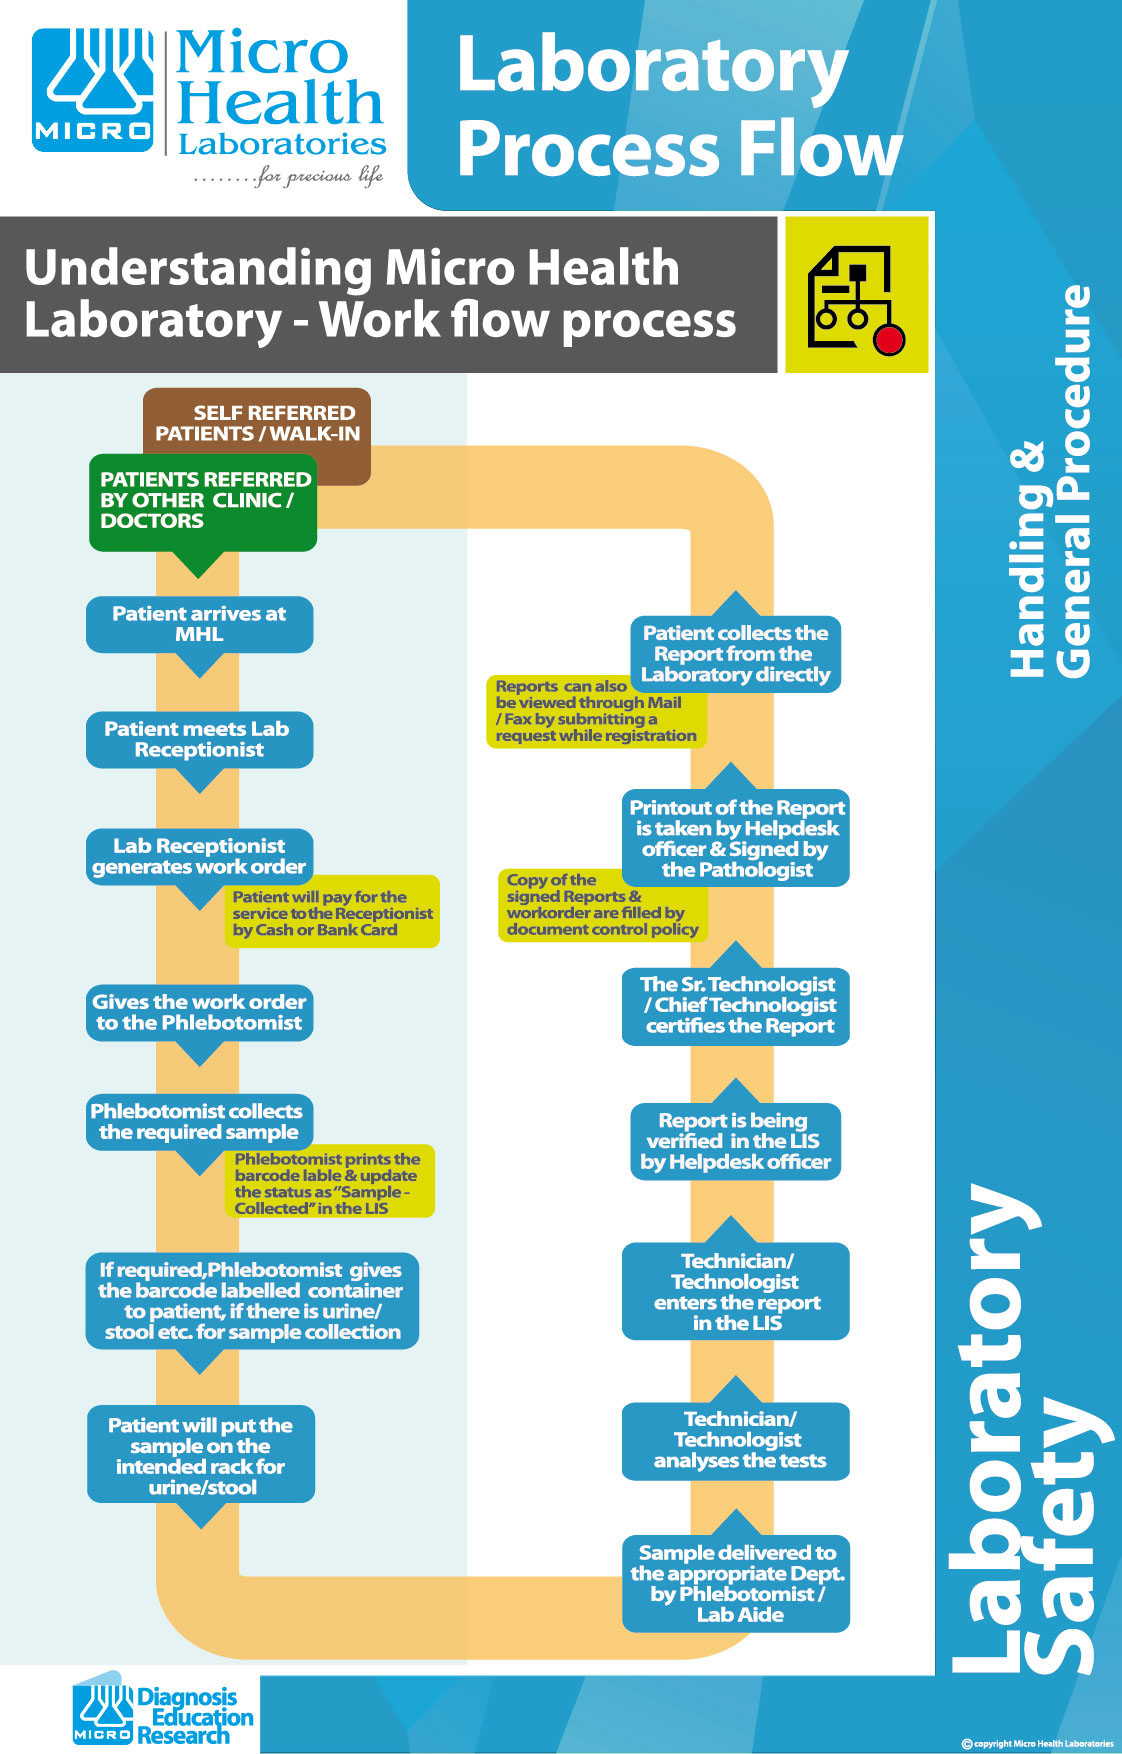 poster labhoratory Accreditation safety workflow chart